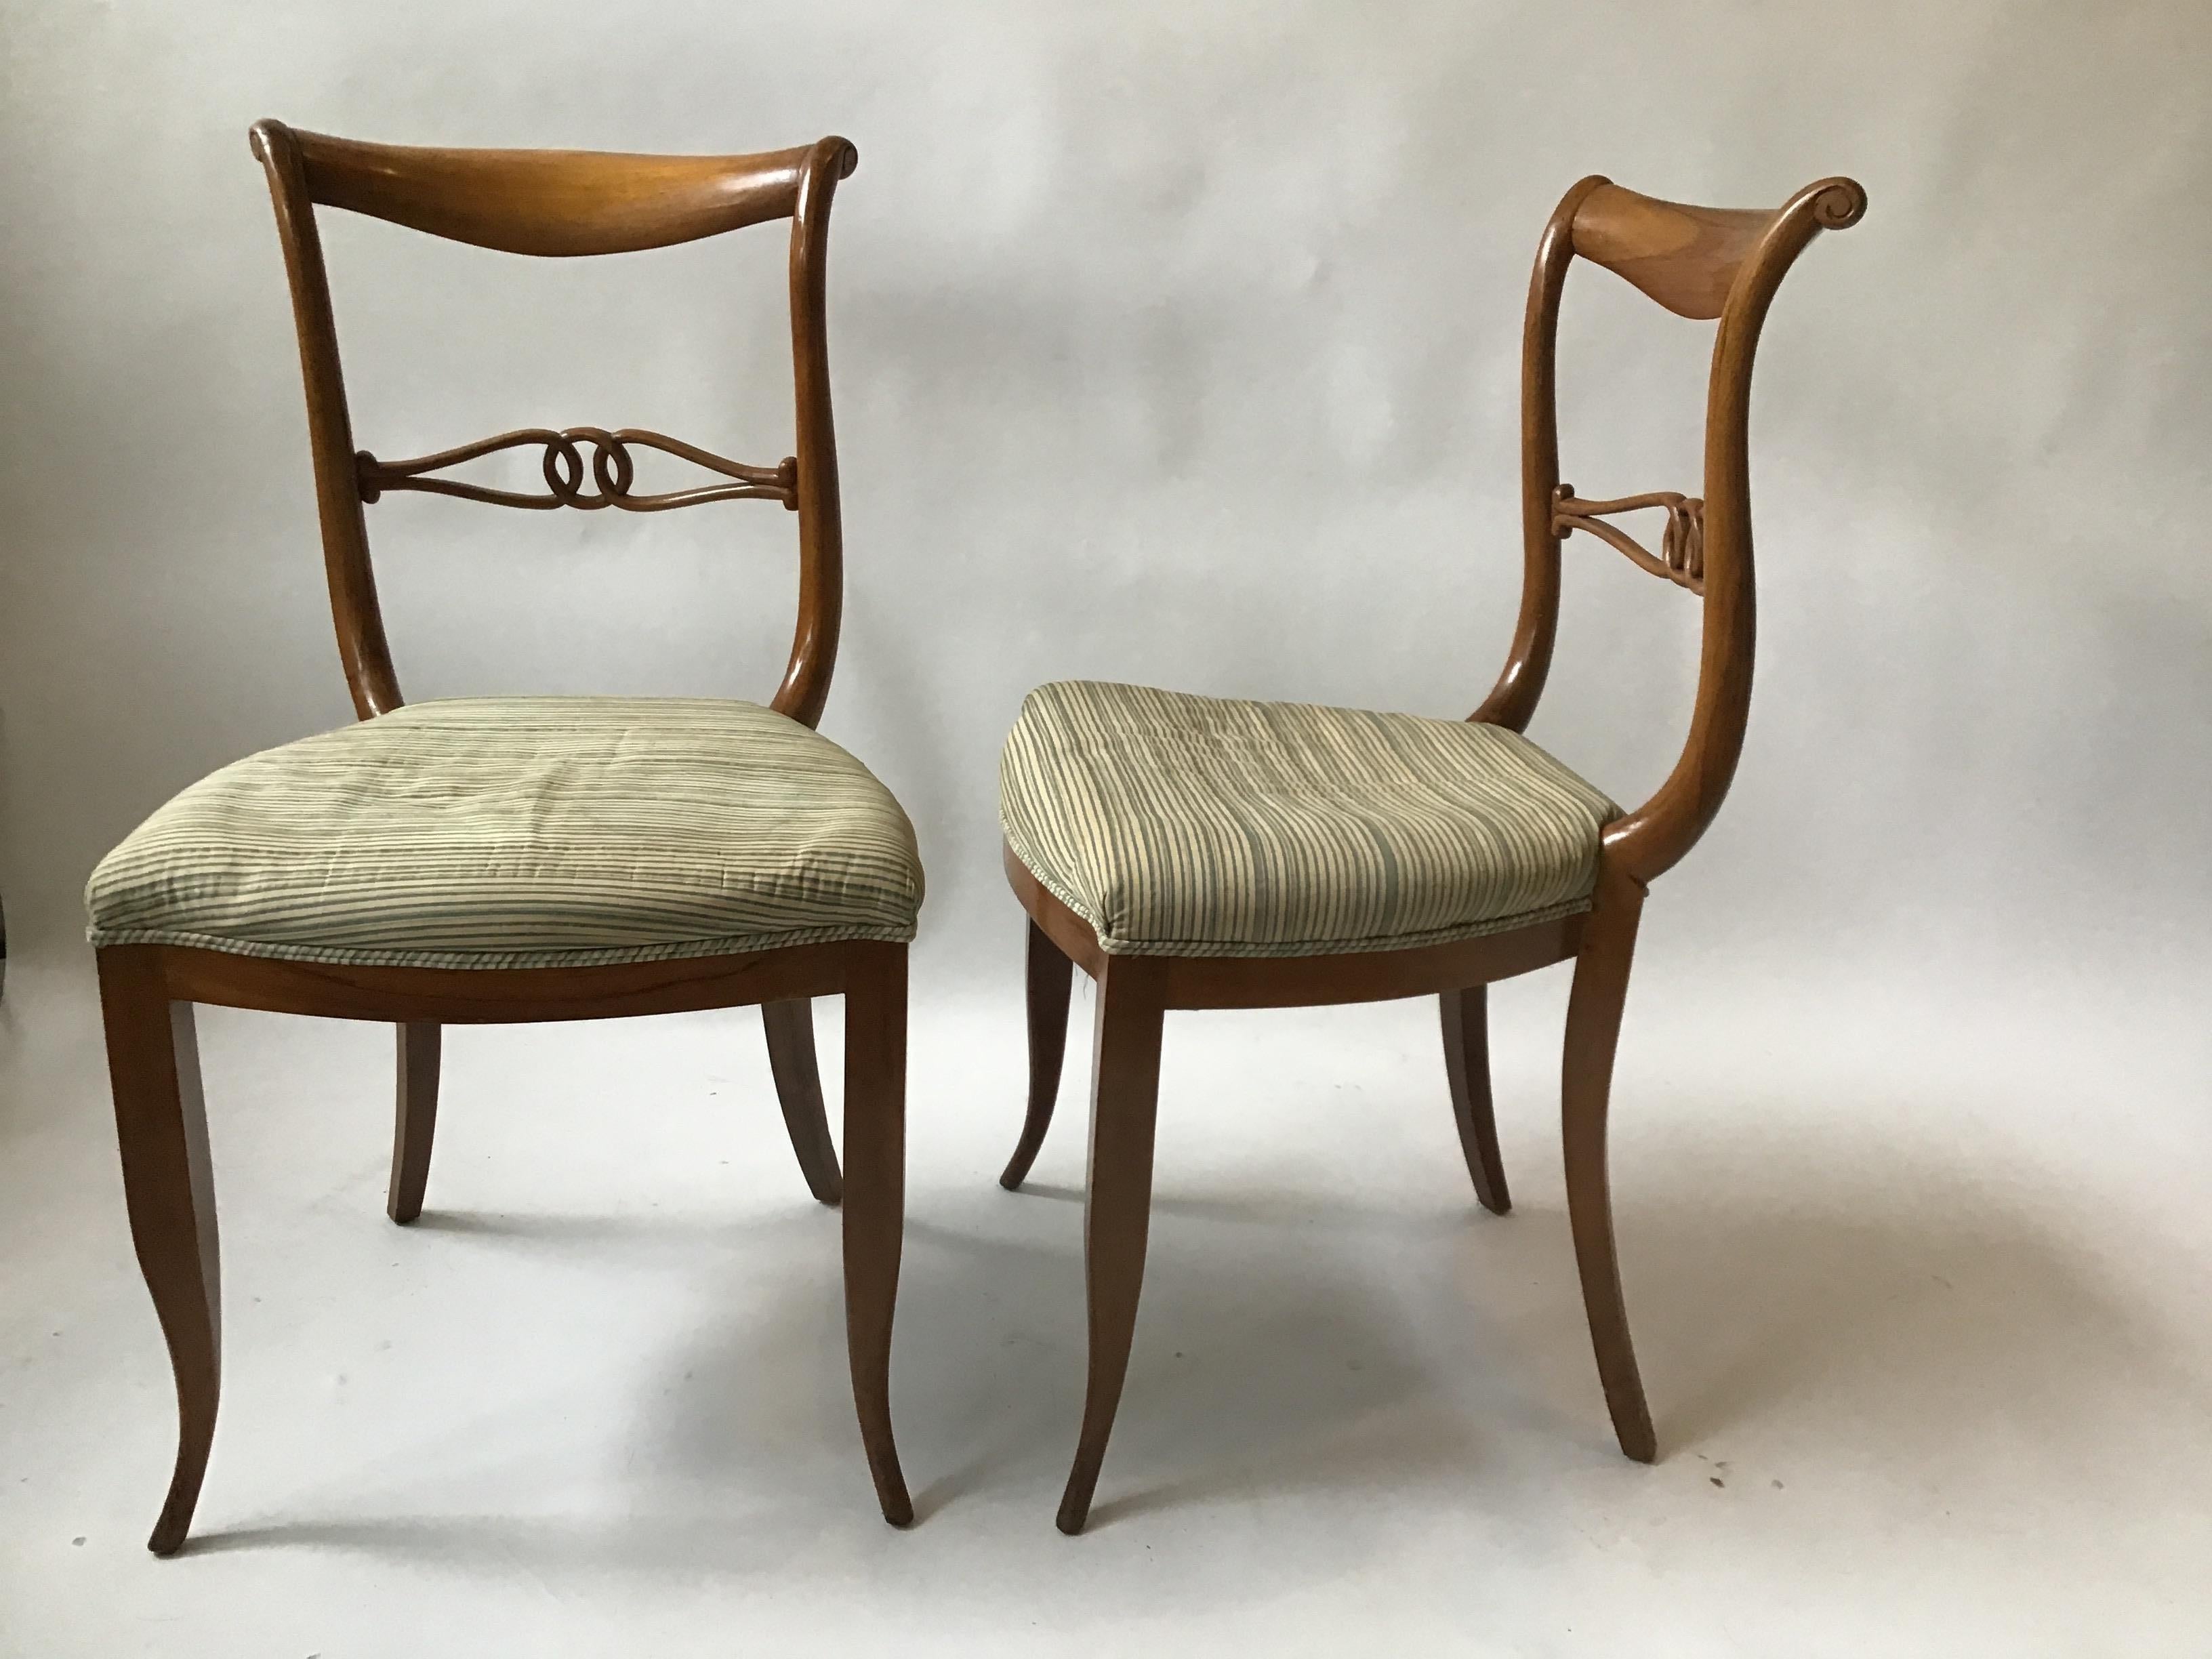 Pair of 1960s Italian classical side chairs. Hand carved wood.